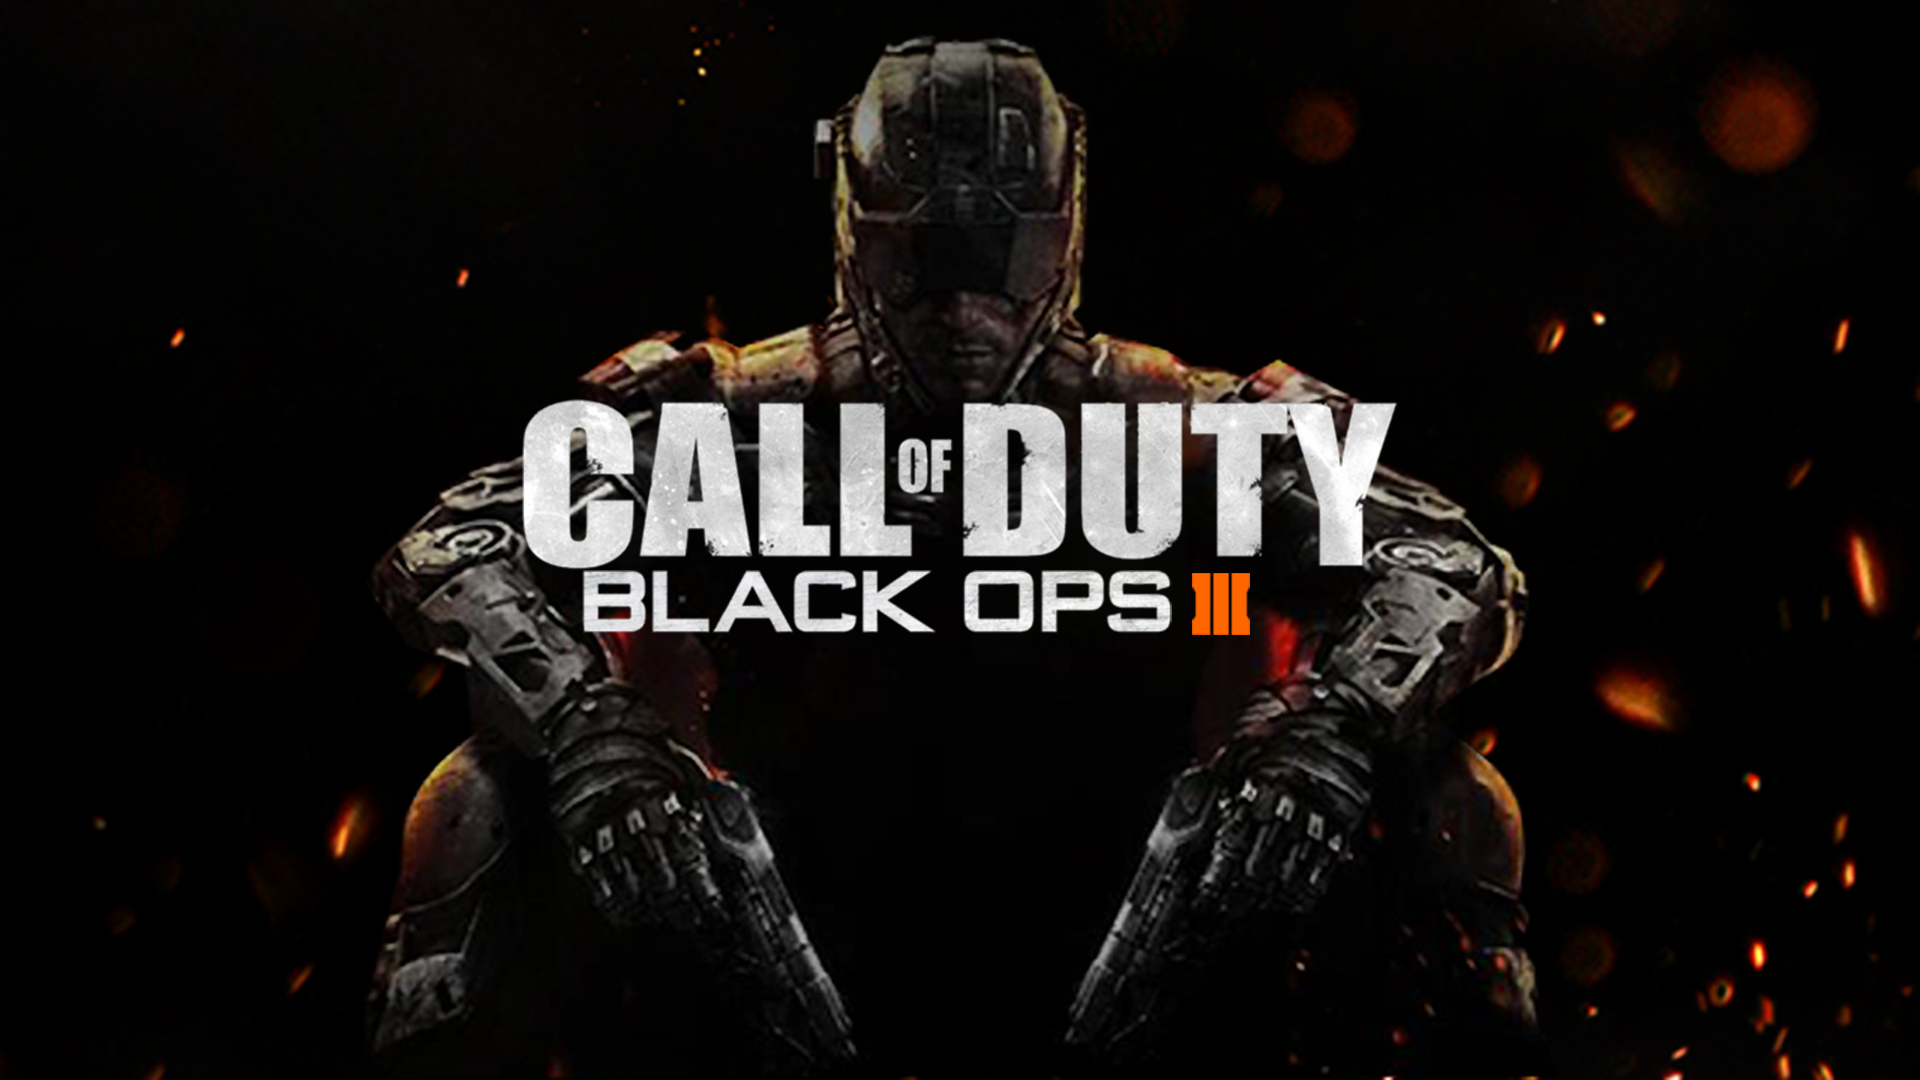 Call of Duty Black Ops 3 gameplay reveal trailer